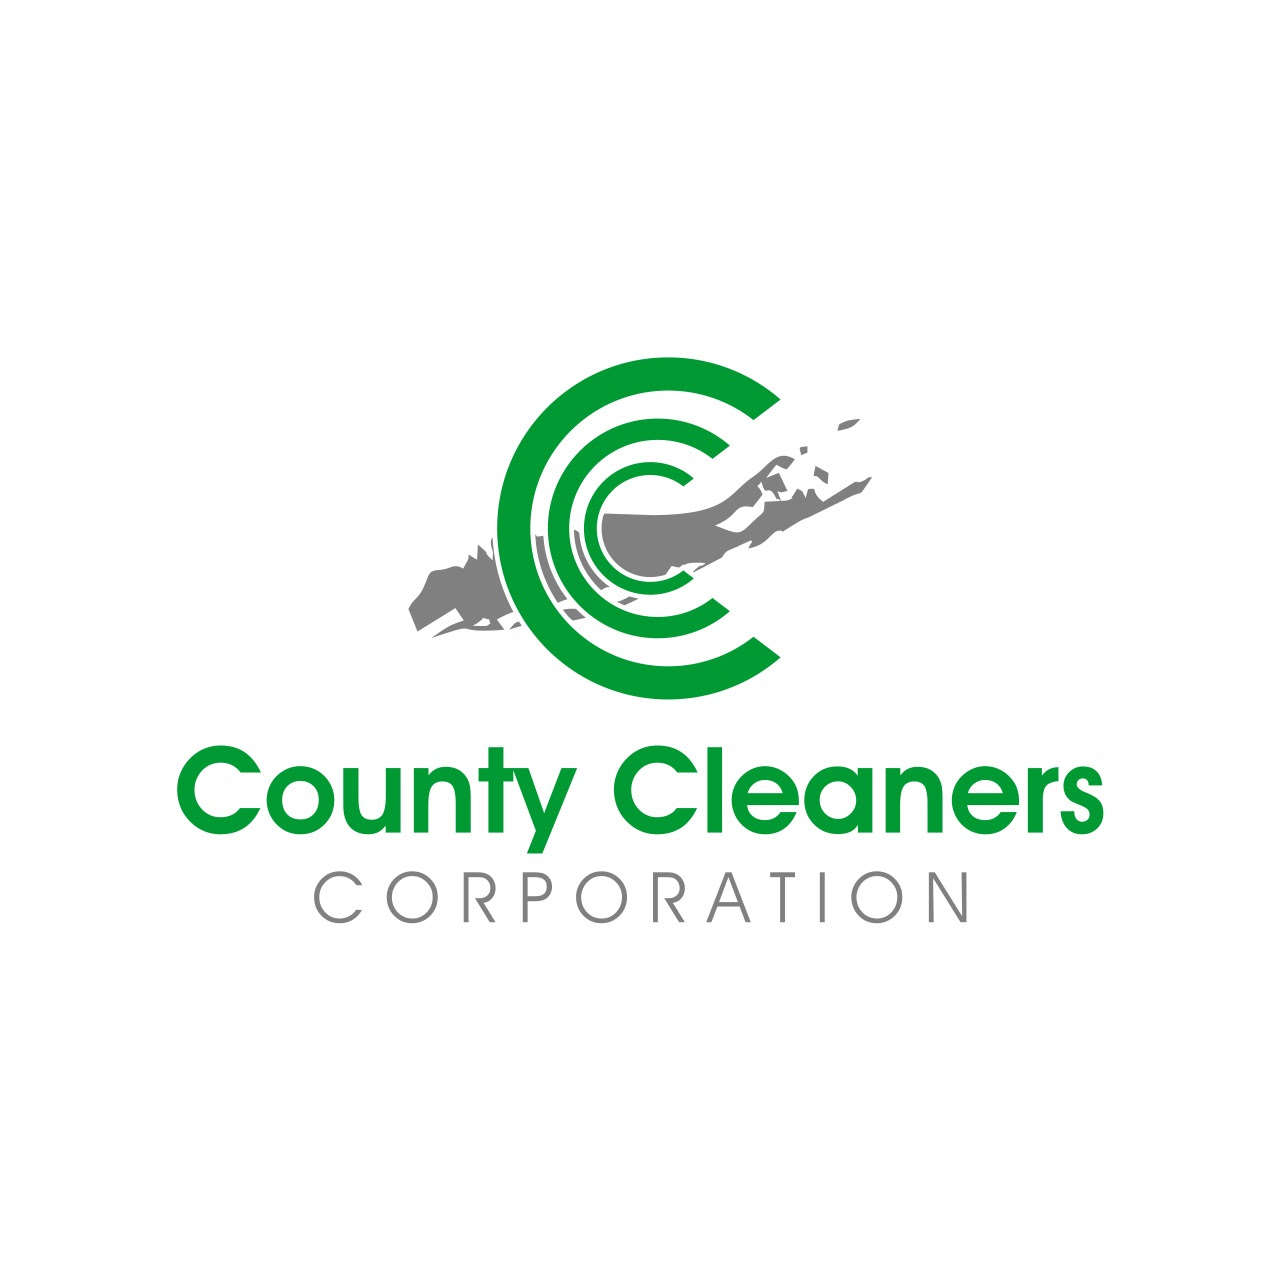 County Cleaners Corporation Logo